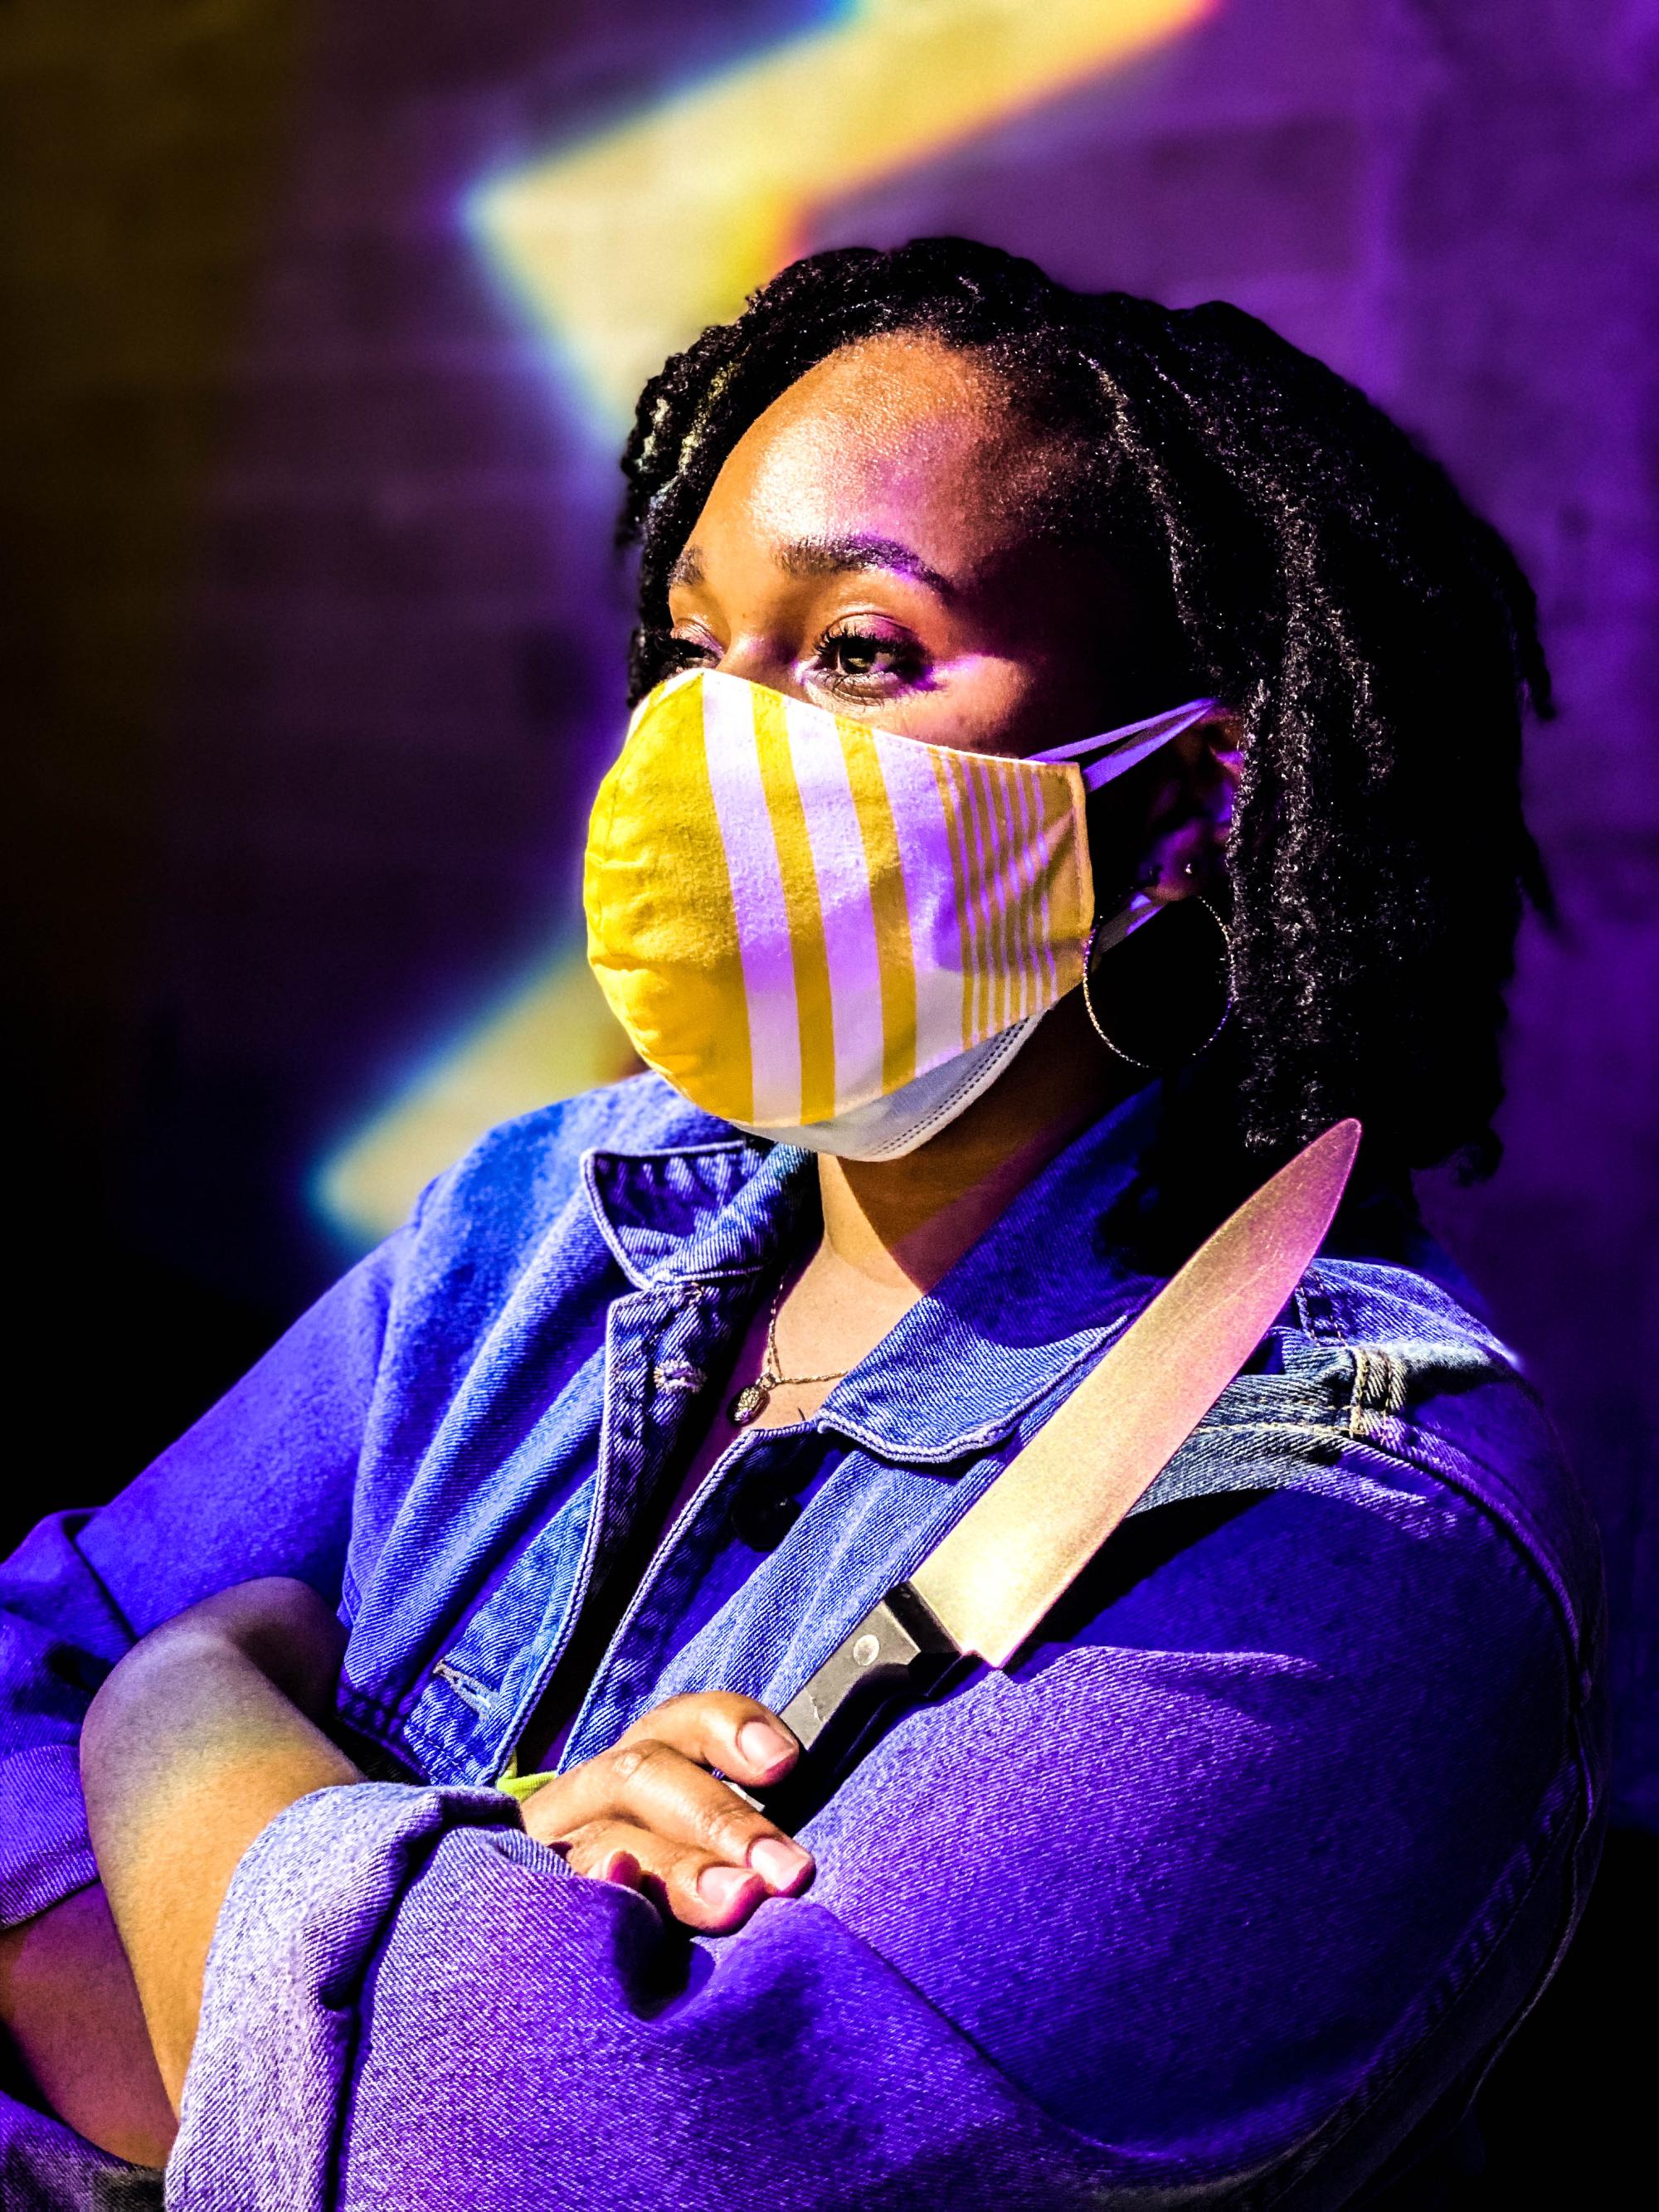 a woman with short dark hair and a yellow mask crosses her arms with a knife in one hand